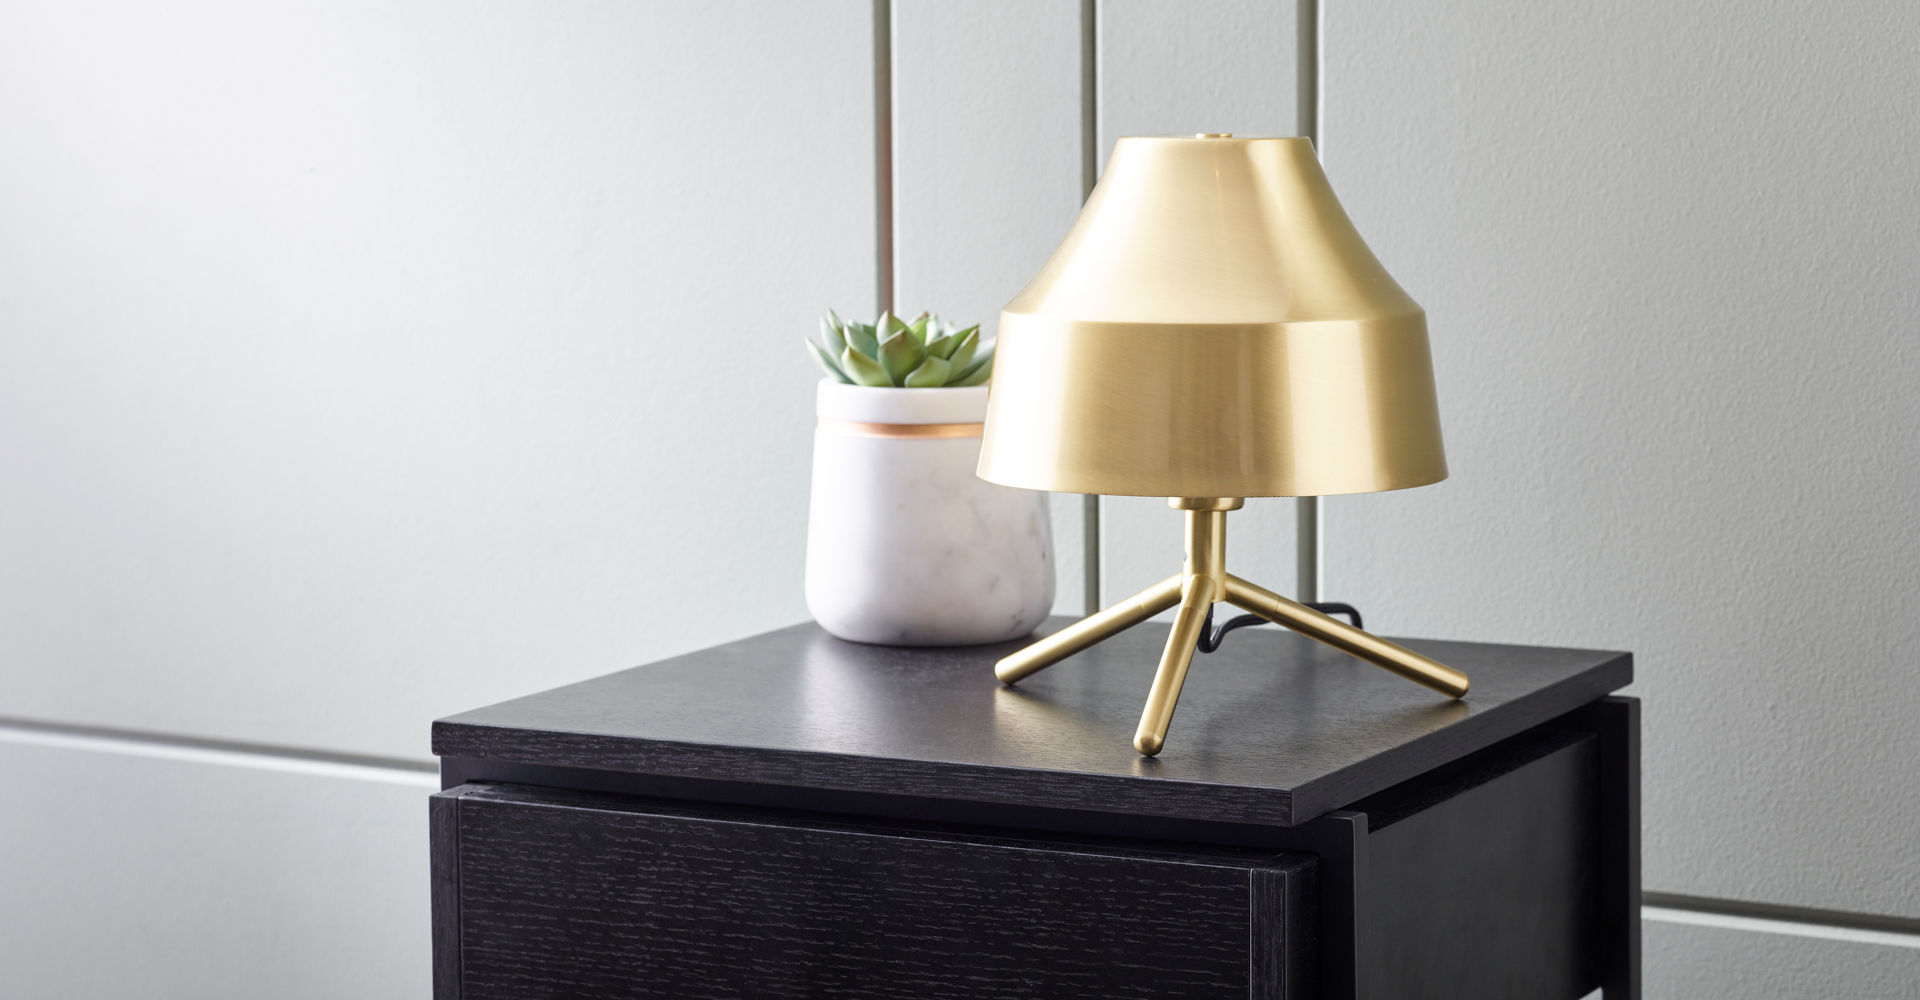 Accessories Hector Brass Bedside Lamp & Small Stella White Marble Vase by Gillmore @ GillmoreSPACE Ltd